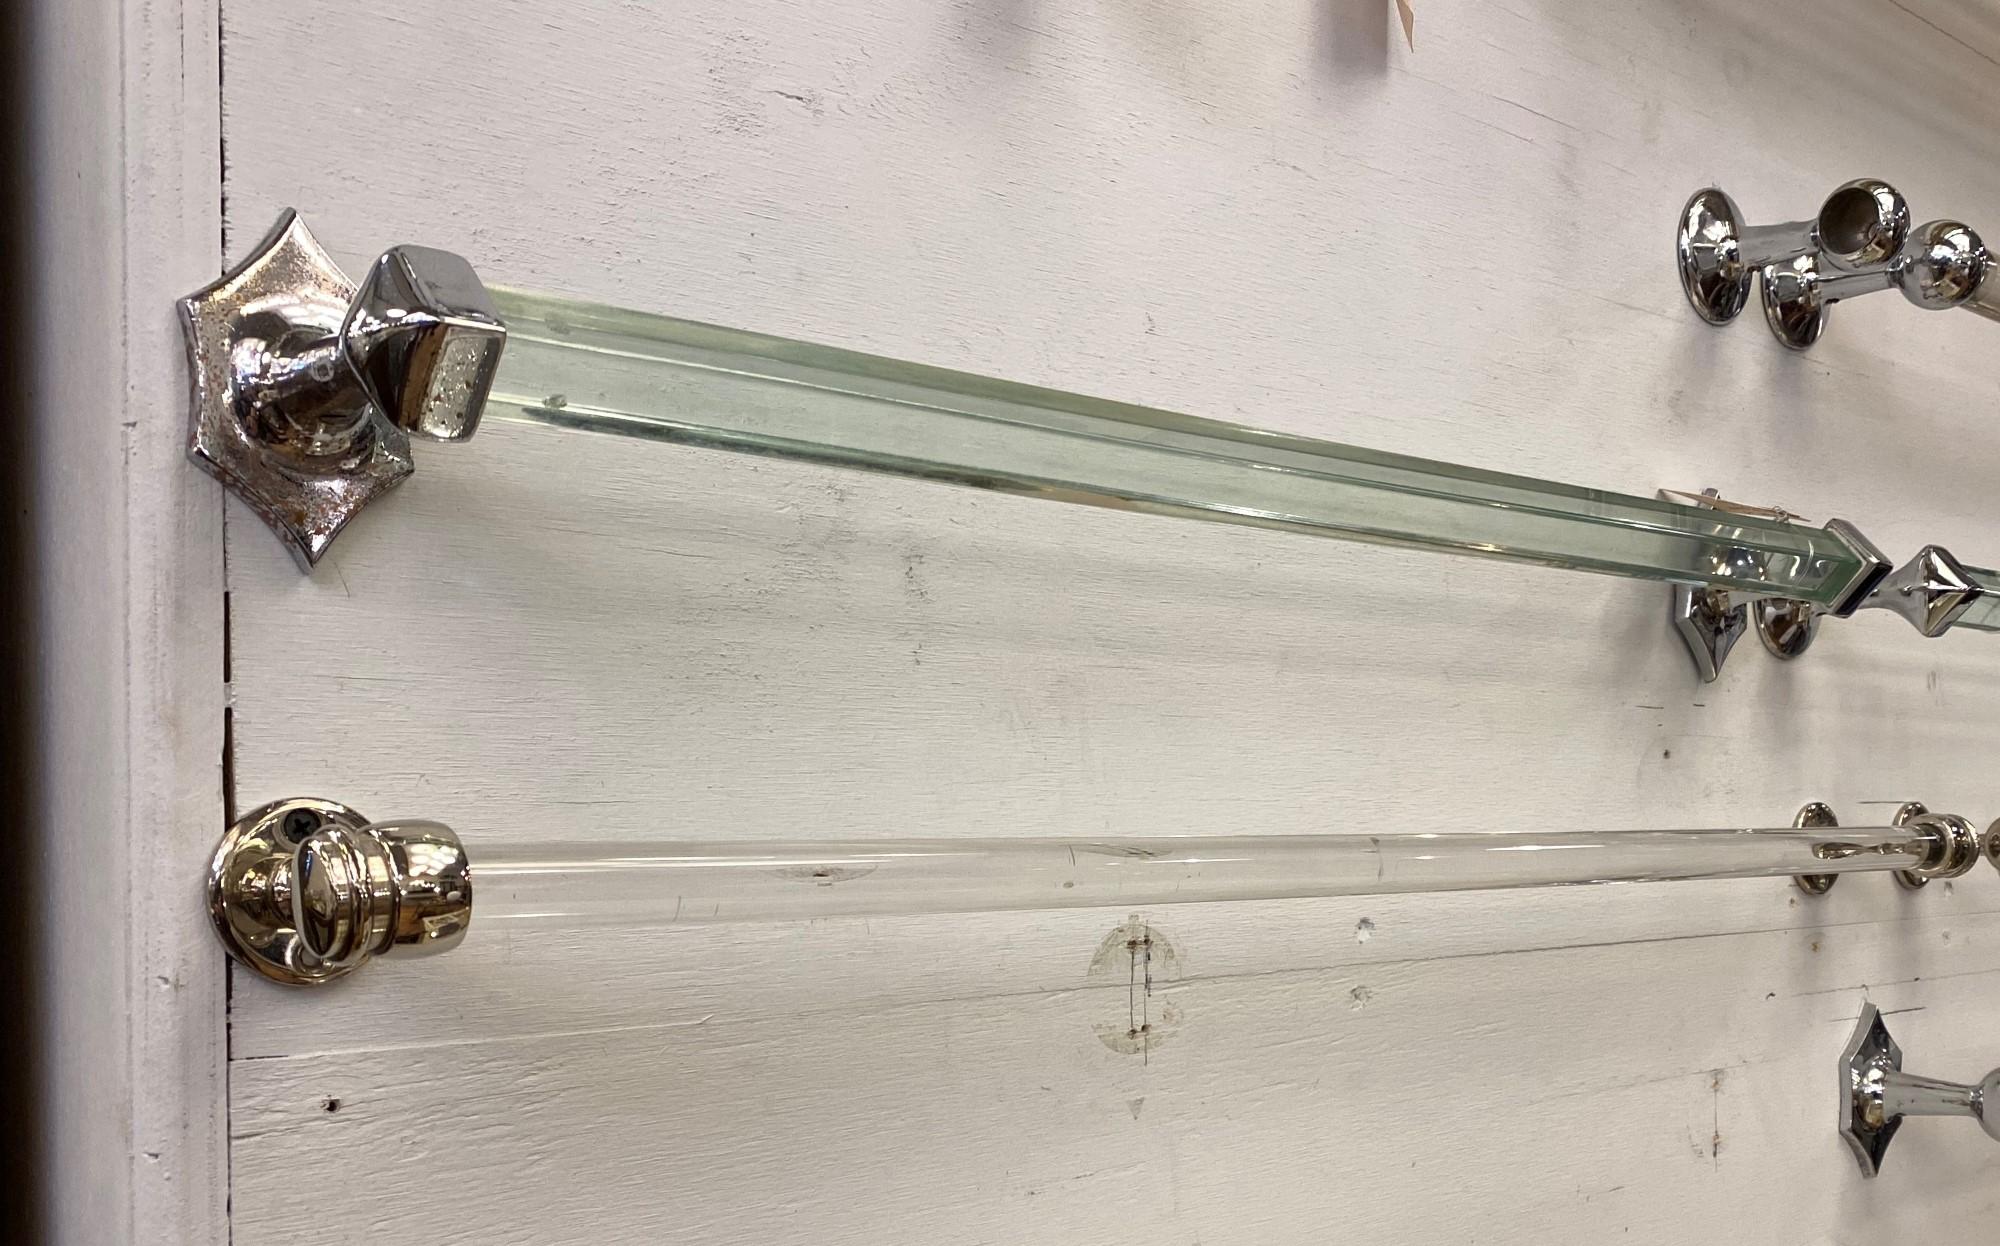 Mid-20th century clear glass towel rod with round nickel plated brass brackets at each end. Manufactured by The Sterling Ham Co. Ltd. of England. Well known for their luxury high quality bathroom products. This can be seen at our 333 West 52nd St